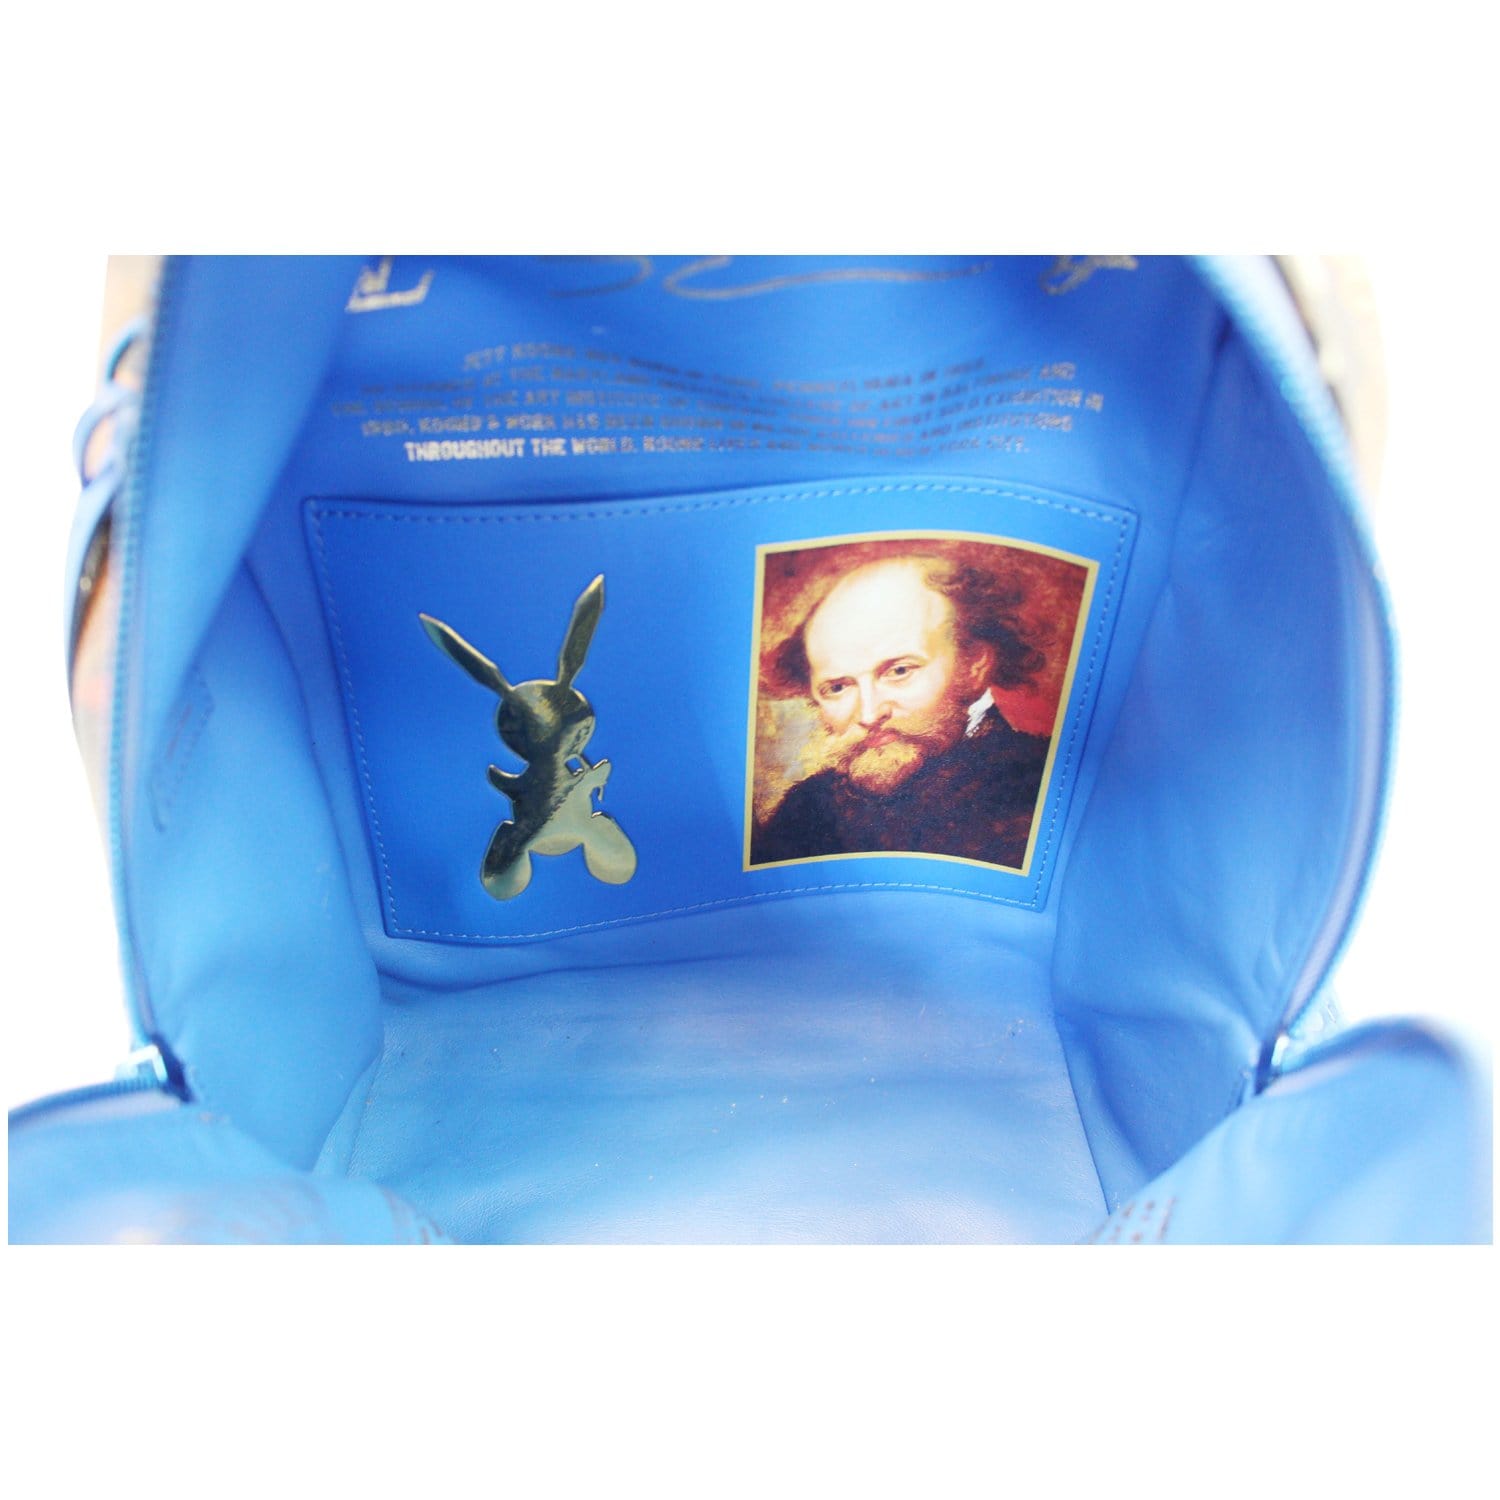 Louis Vuitton Palm Springs Backpack Limited Edition Jeff Koons Van Gogh P